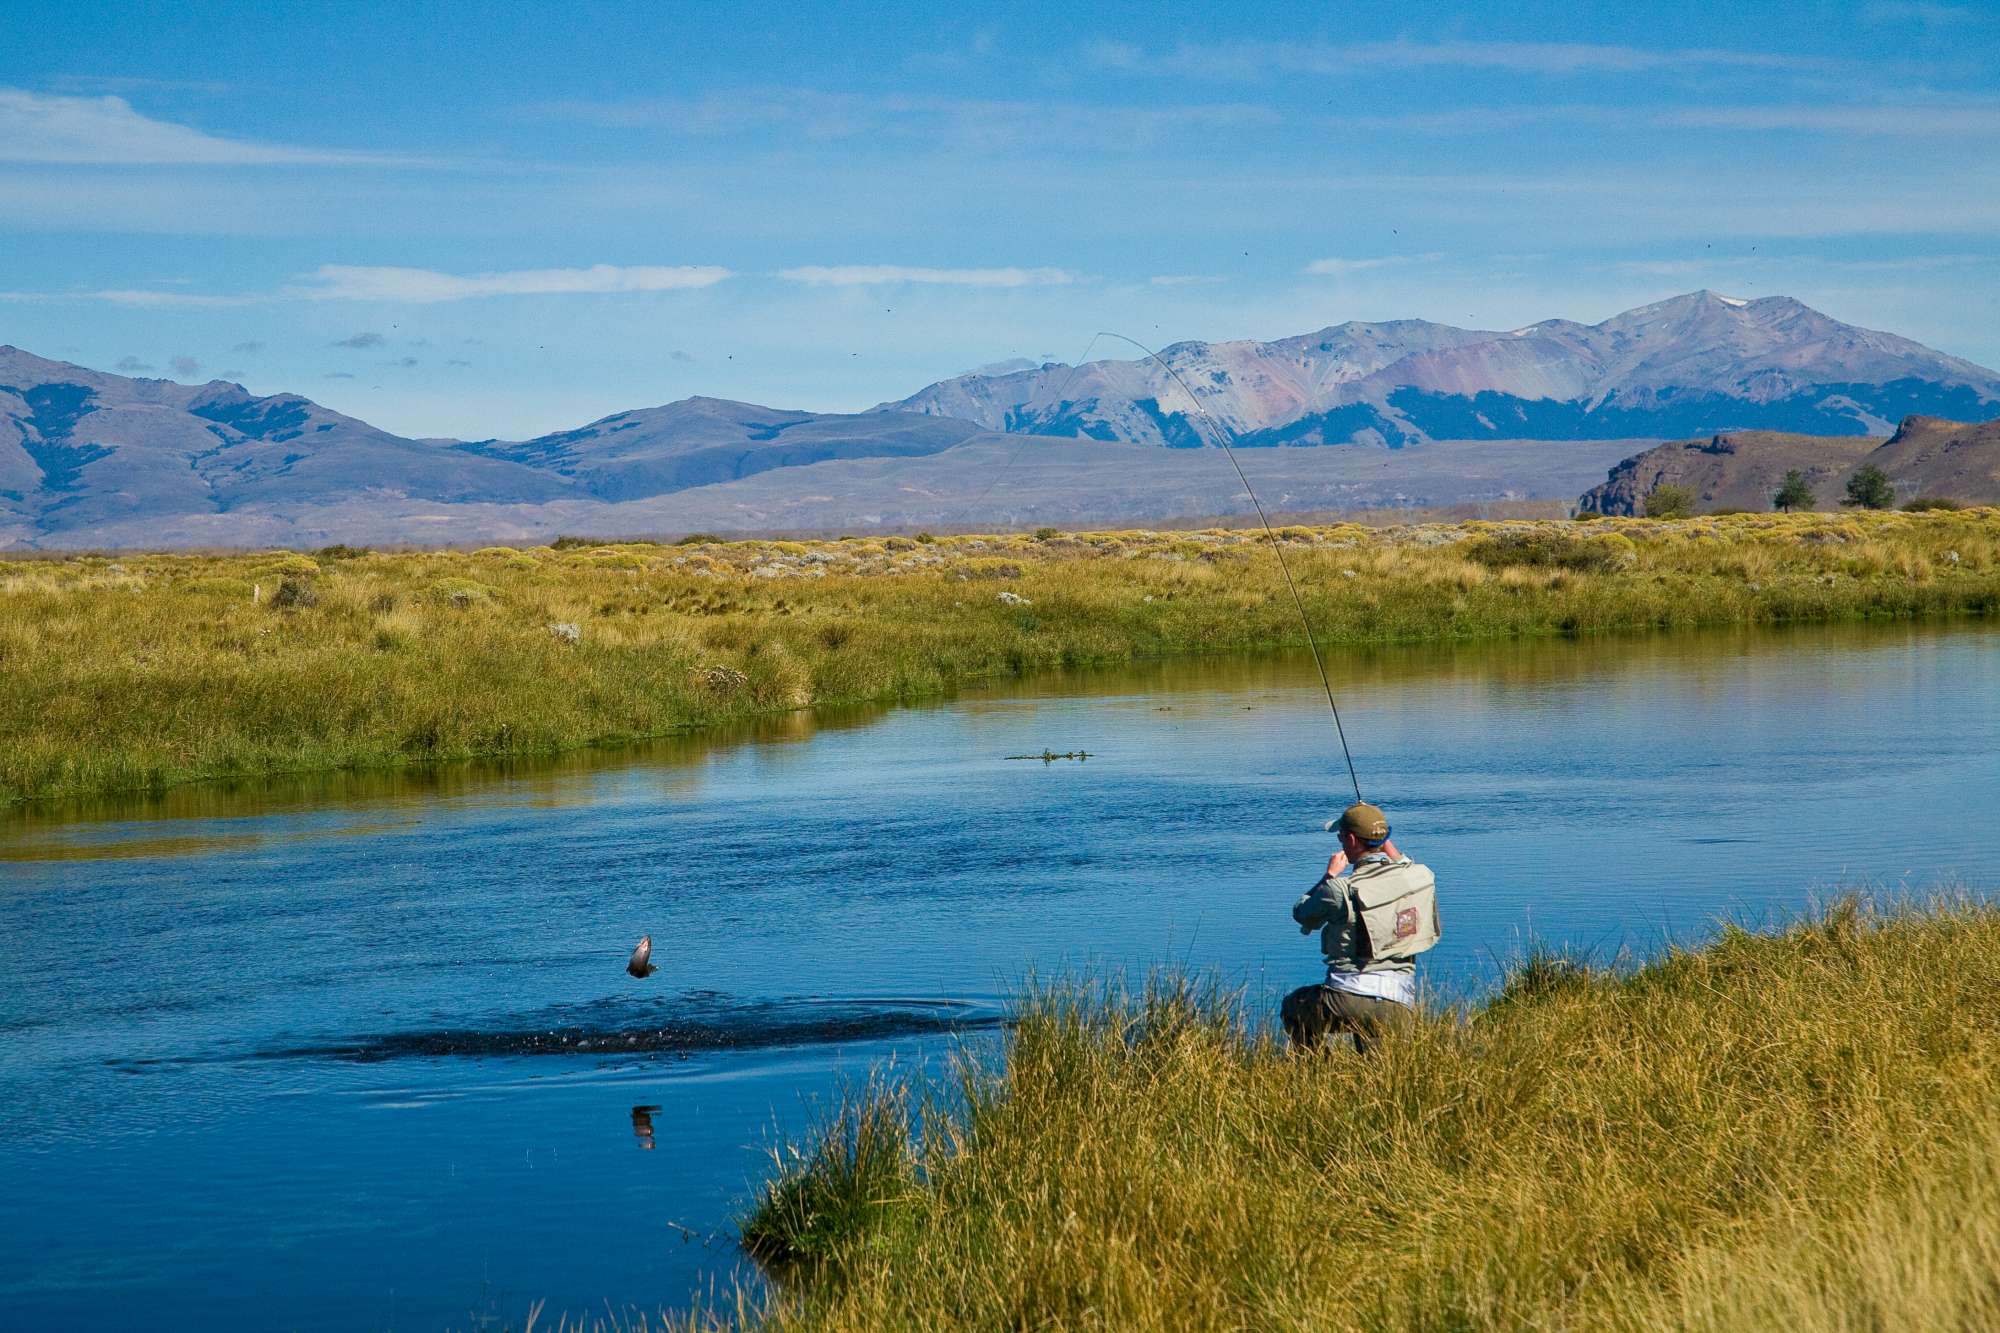 South America; The Last Frontier (Fishing South America; Argentina